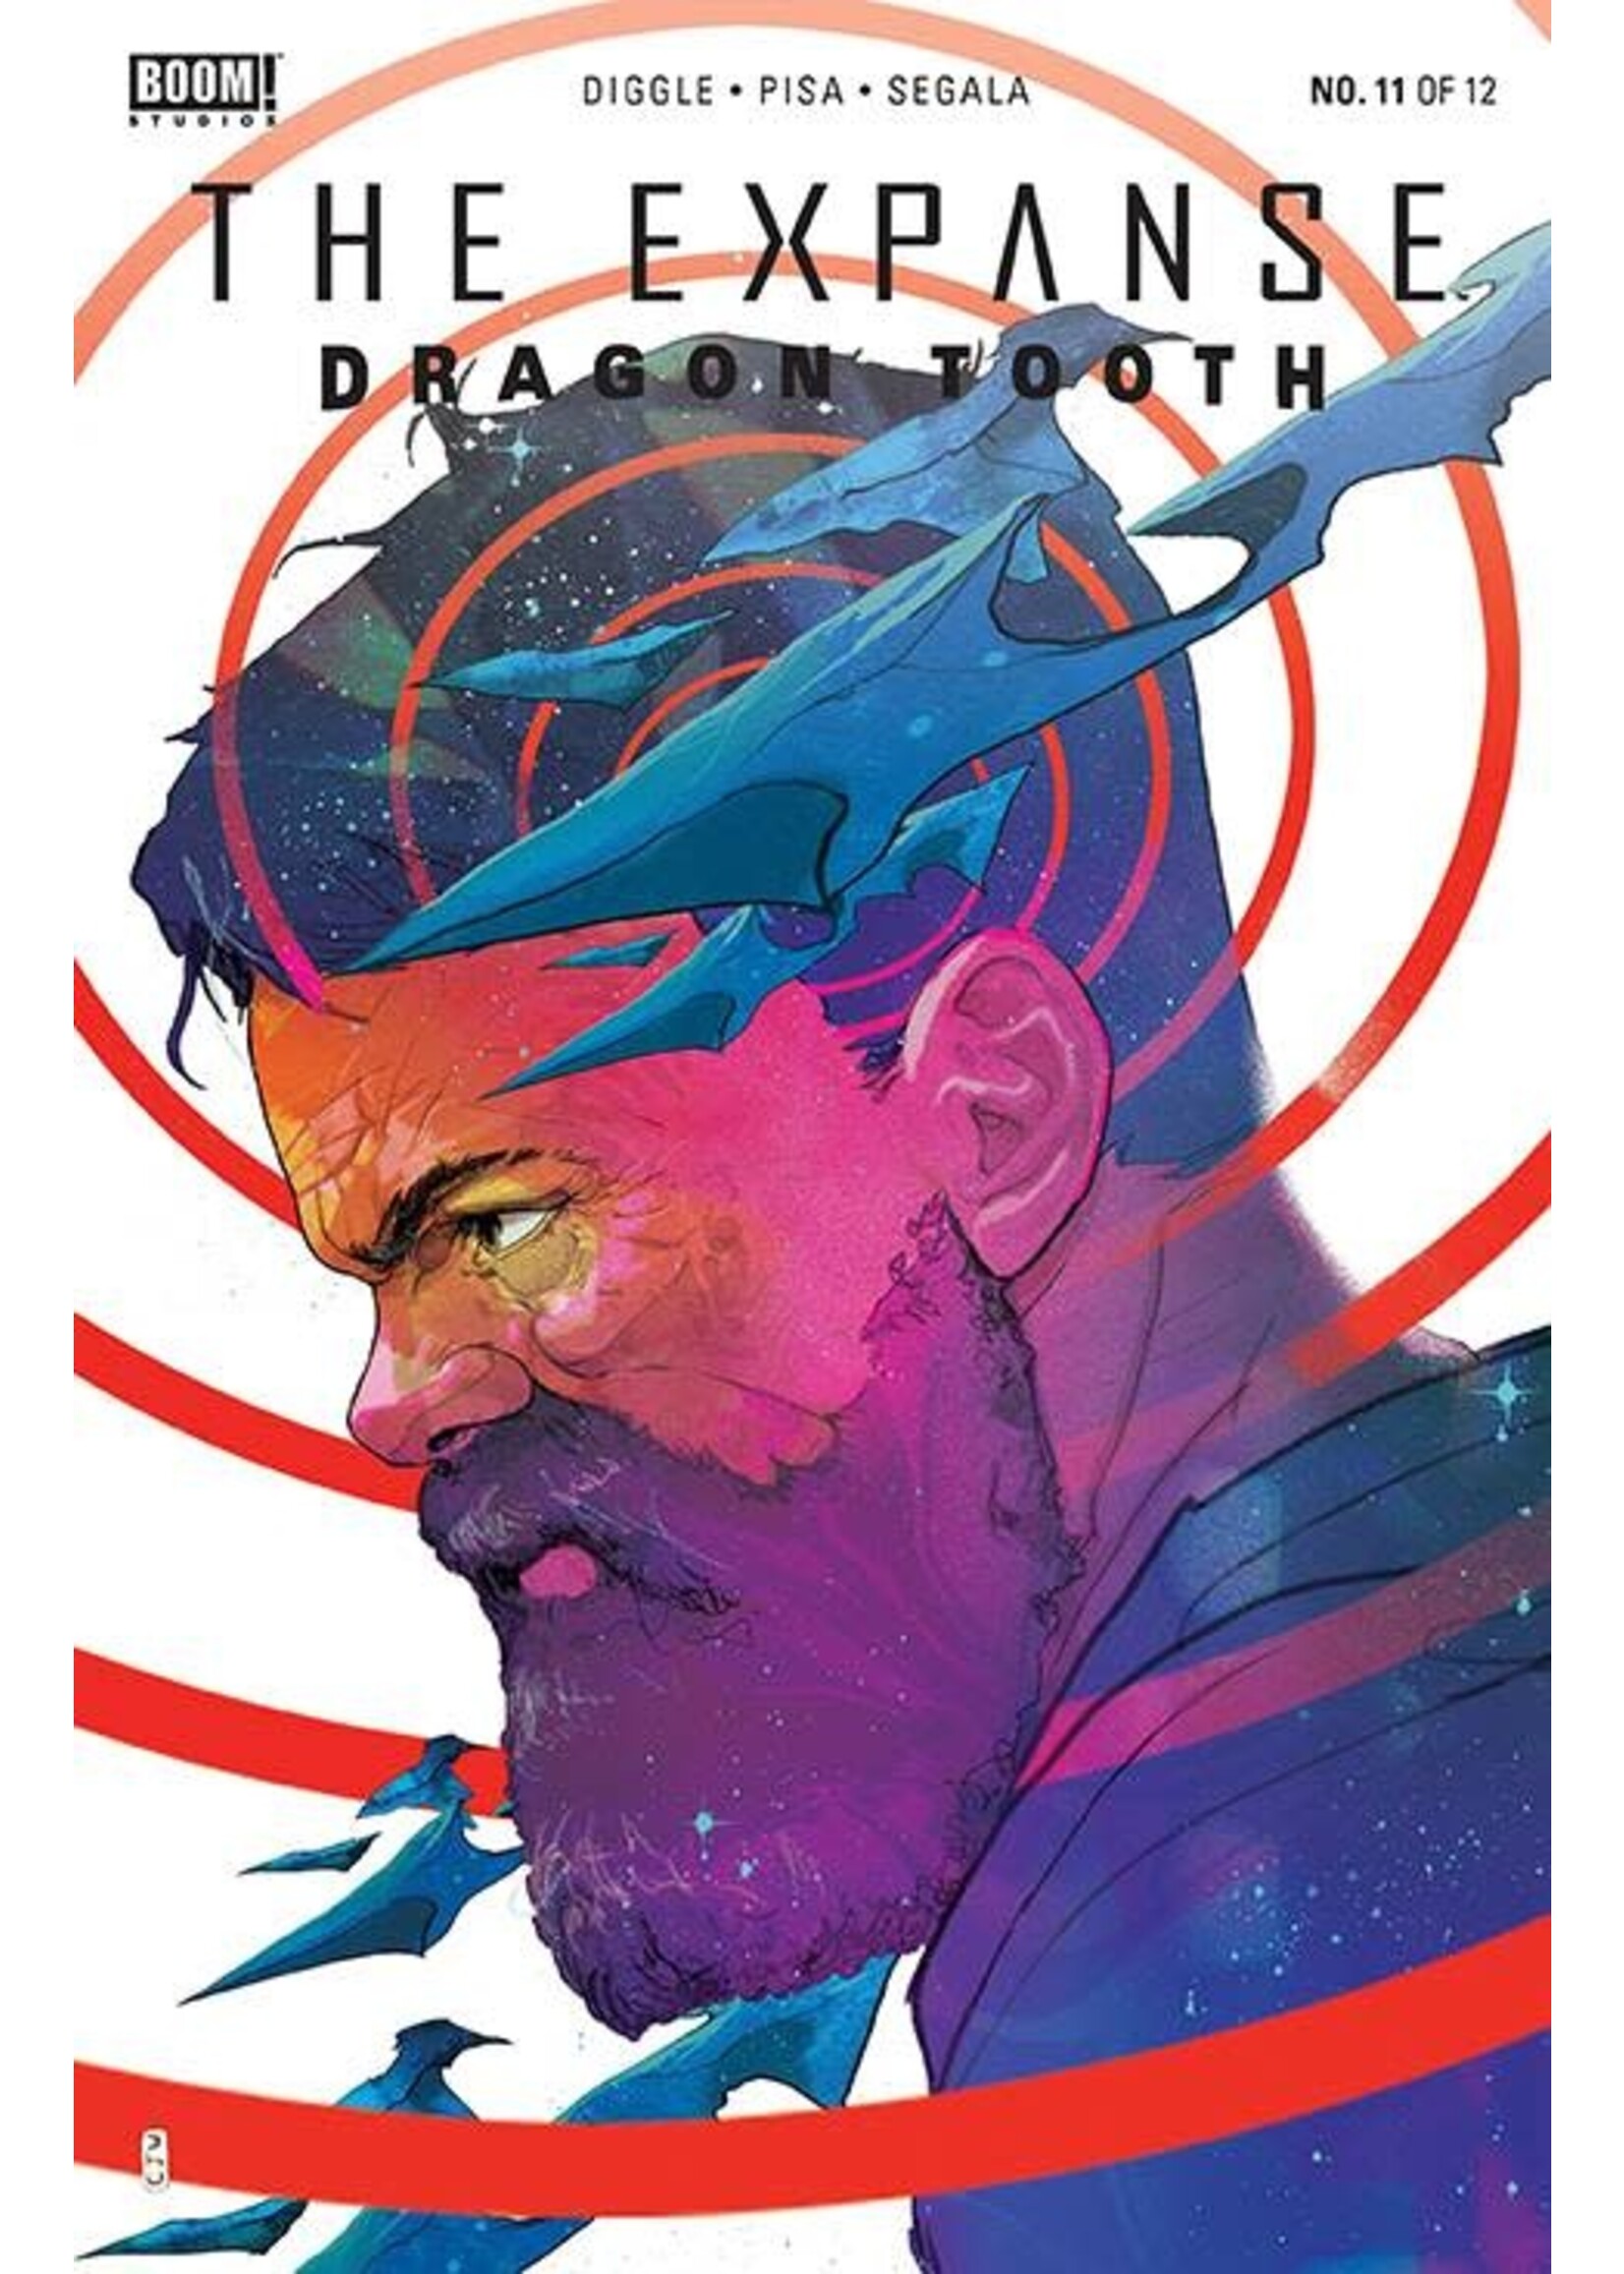 BOOM! STUDIOS EXPANSE THE DRAGON TOOTH #11 (OF 12) CVR A WARD